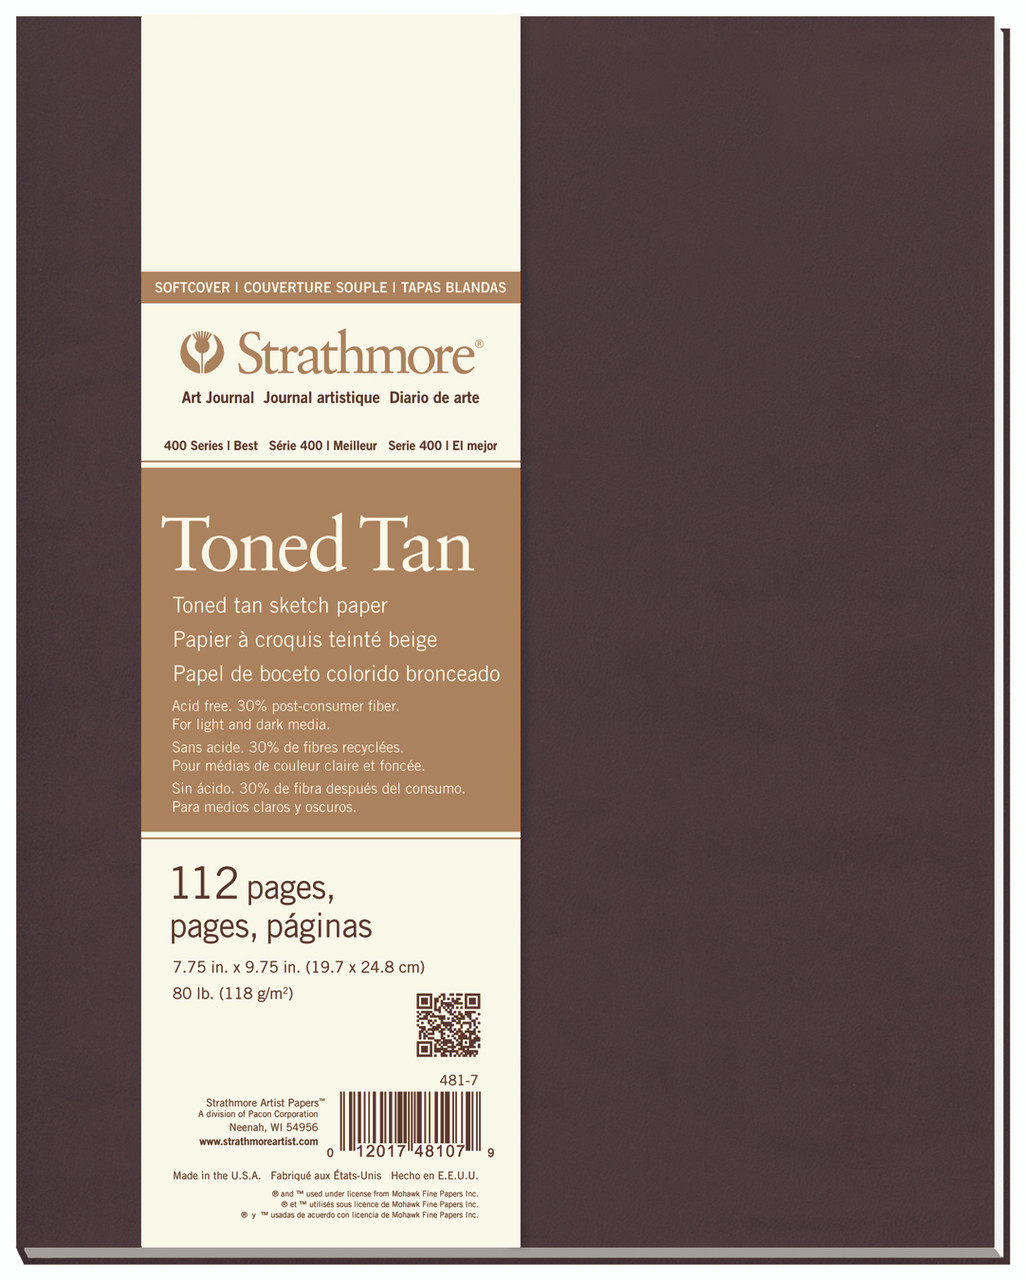 Strathmore 400 Toned Tan Soft Cover Book 56 Sheets 118gsm 7.75 x 9.75 inches